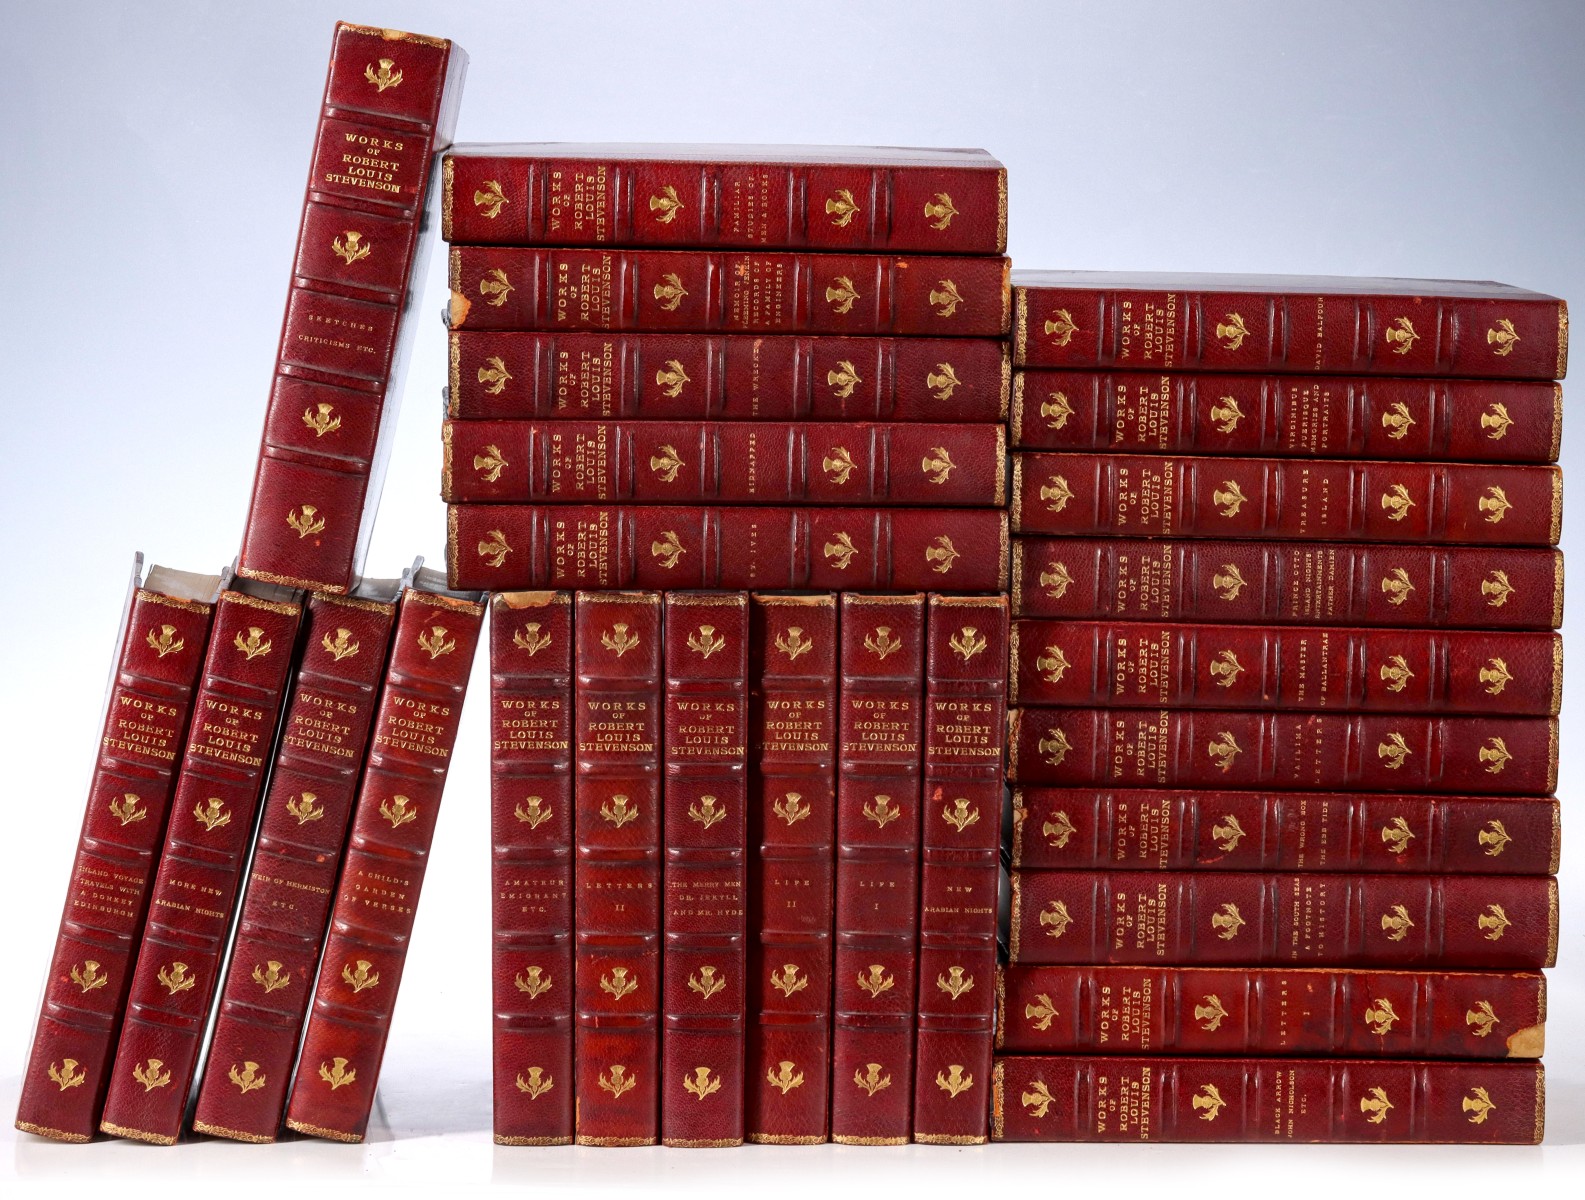 WORKS OF ROBERT LOUIS STEVENSON BOUND IN RED LEATHER